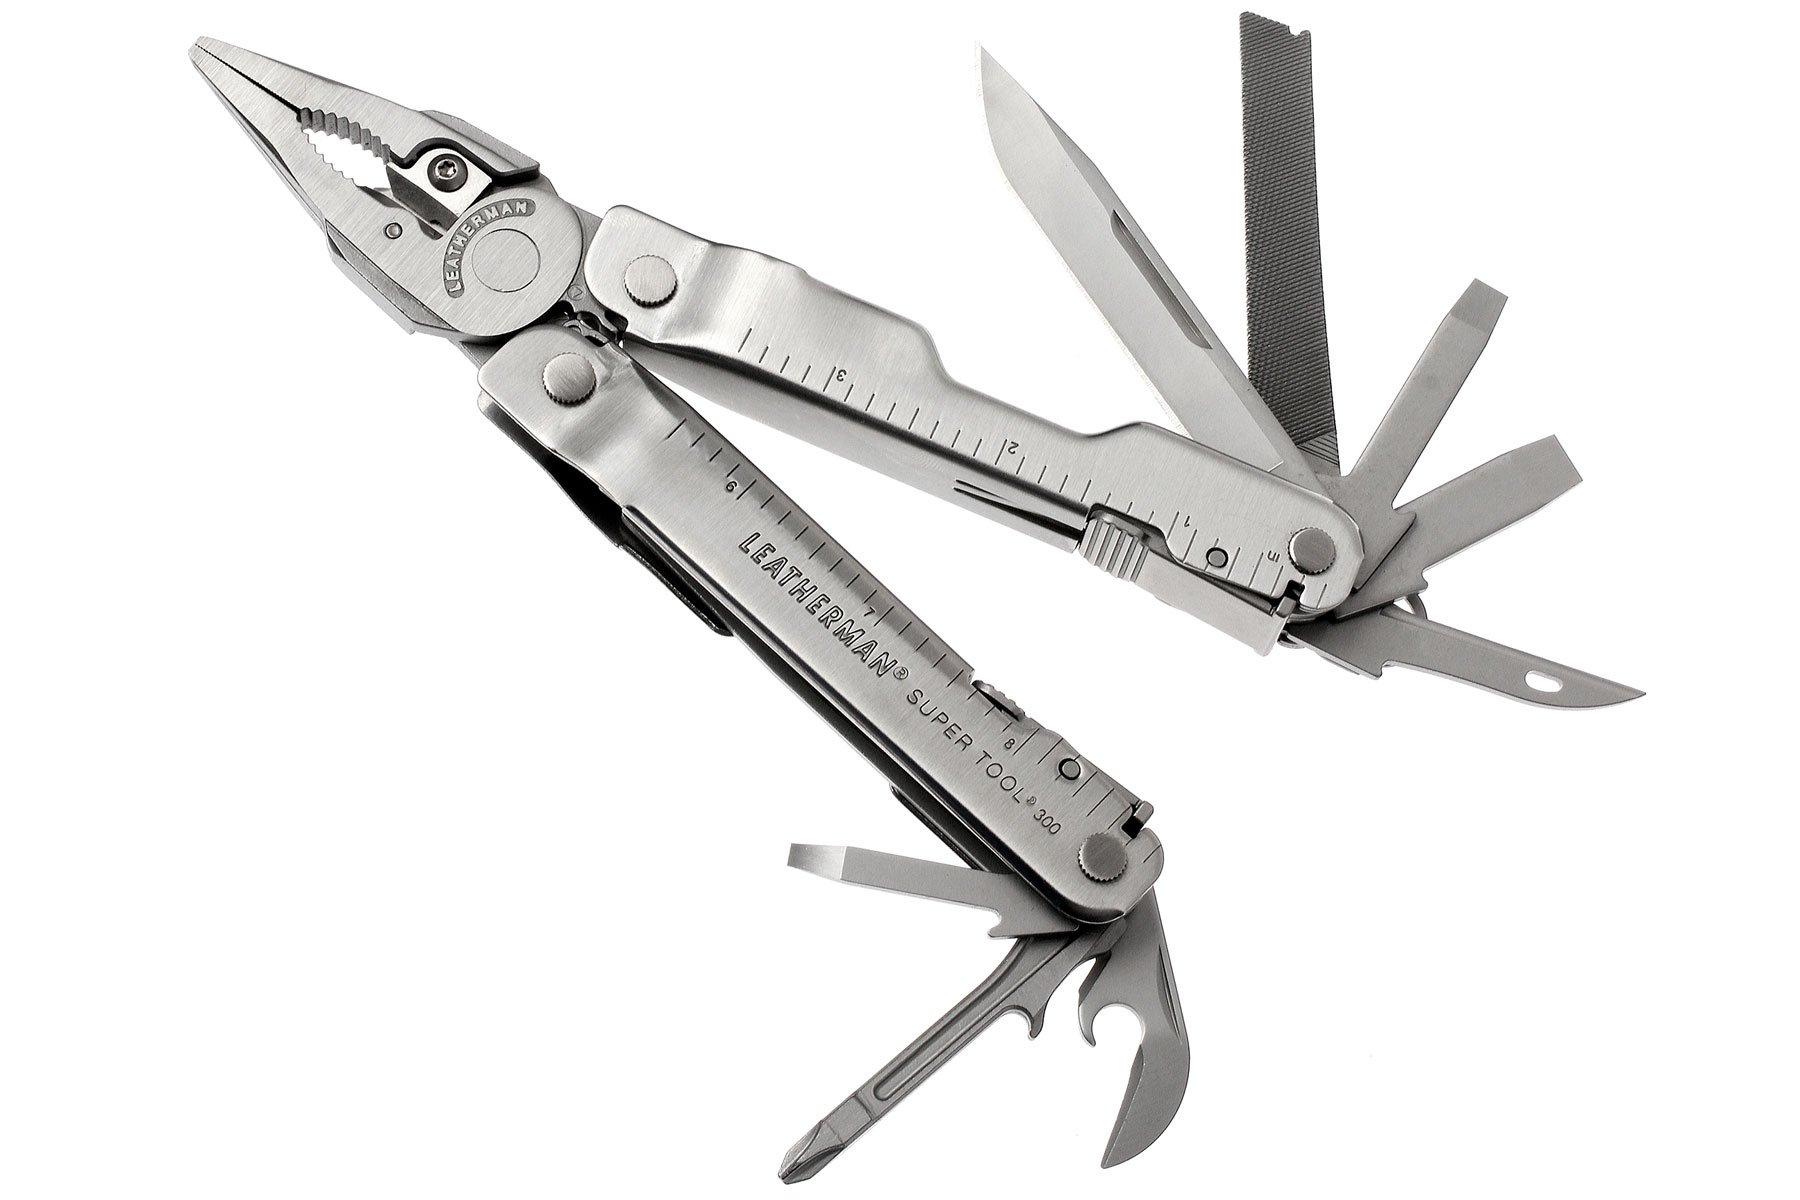 How to Close the Blades on a Leatherman Super Tool